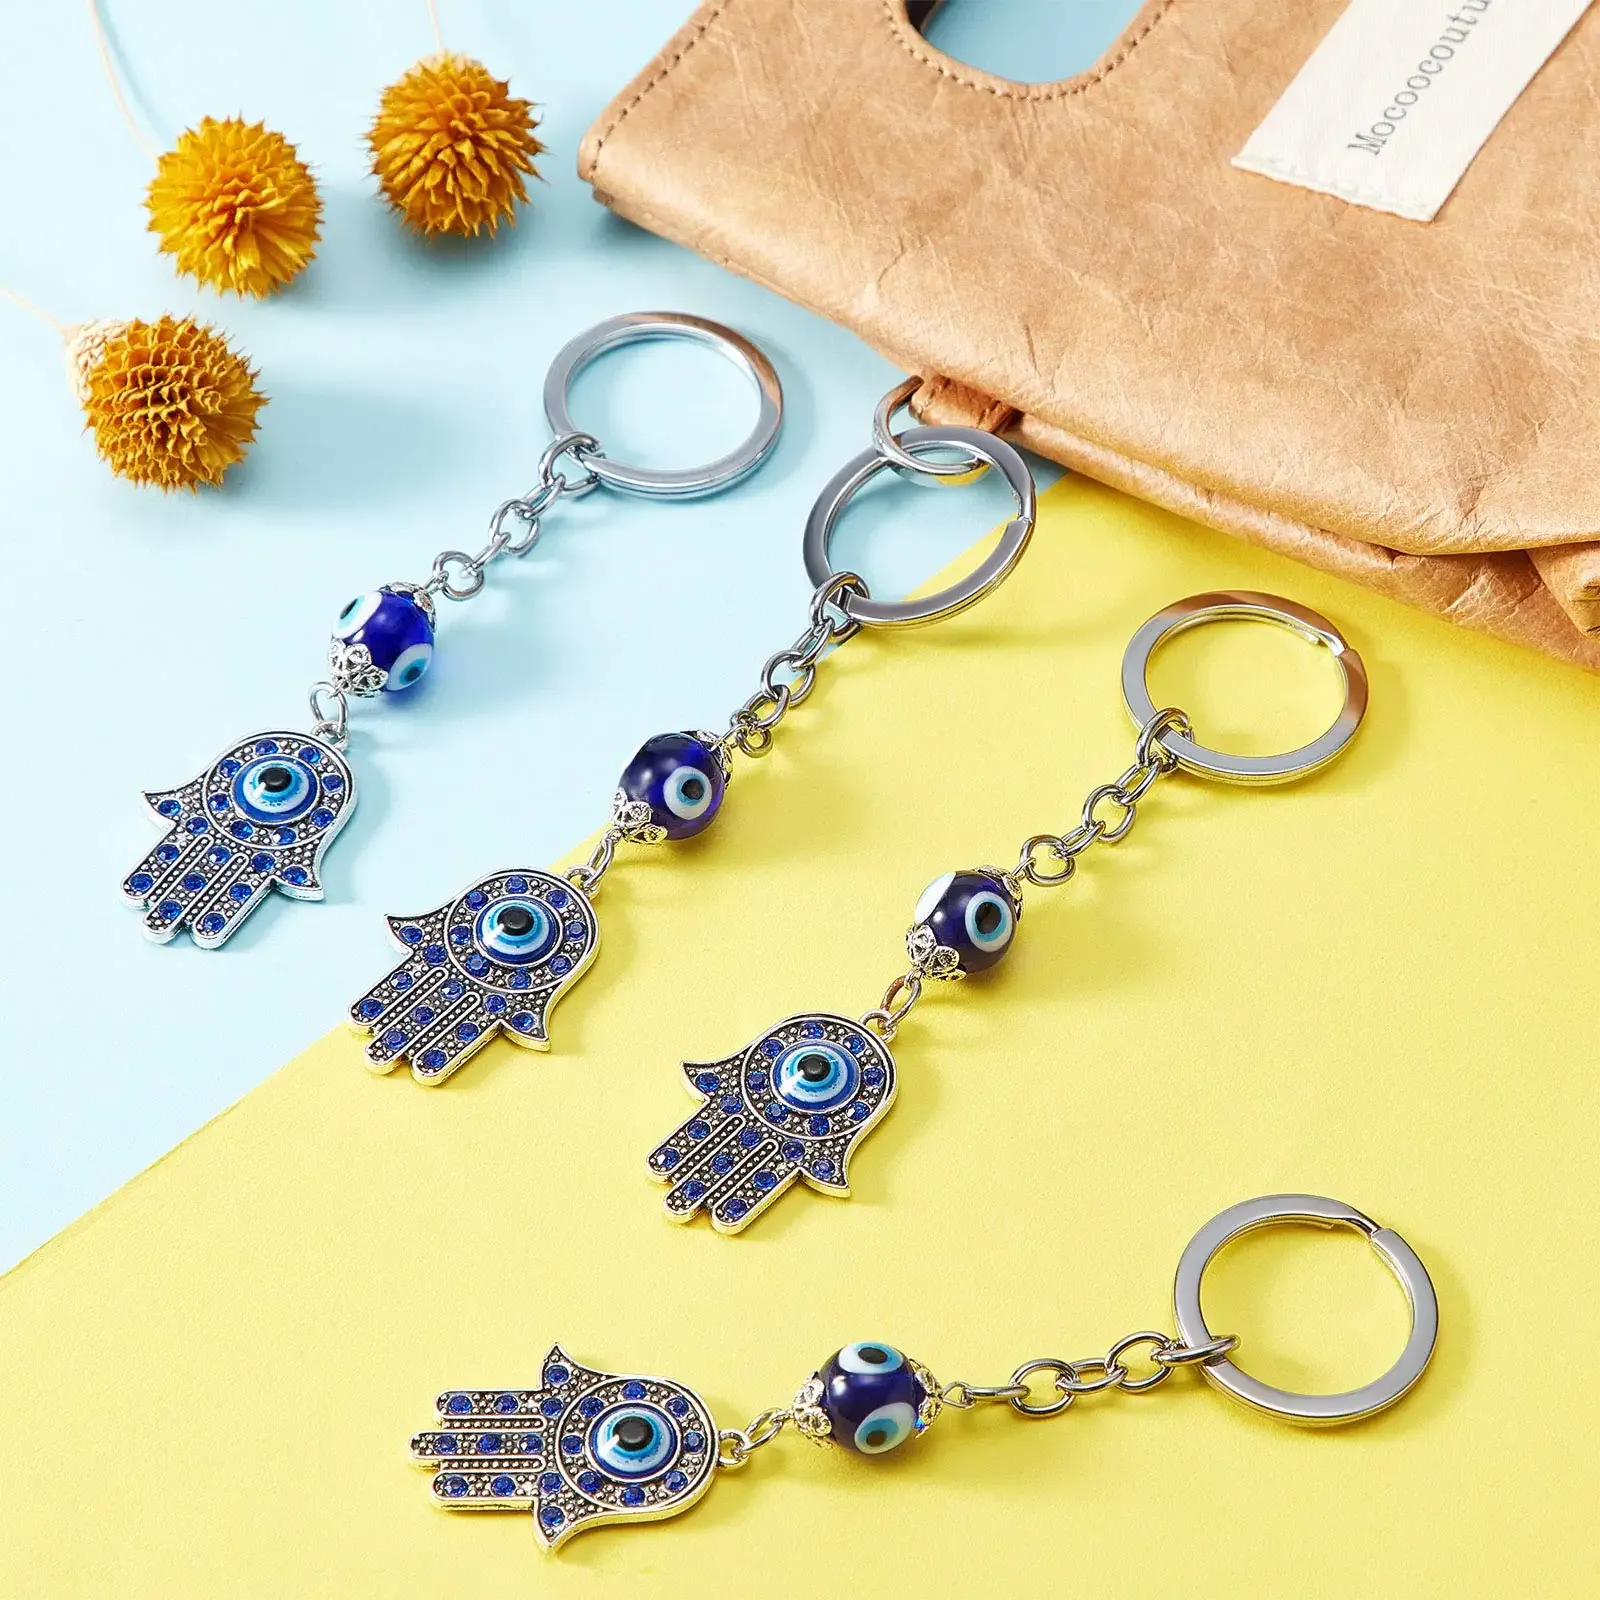 3ml hamsa hand keychain evil eye silver keychain fatima protection charms blue good luck key holder for attaching to keys and bags